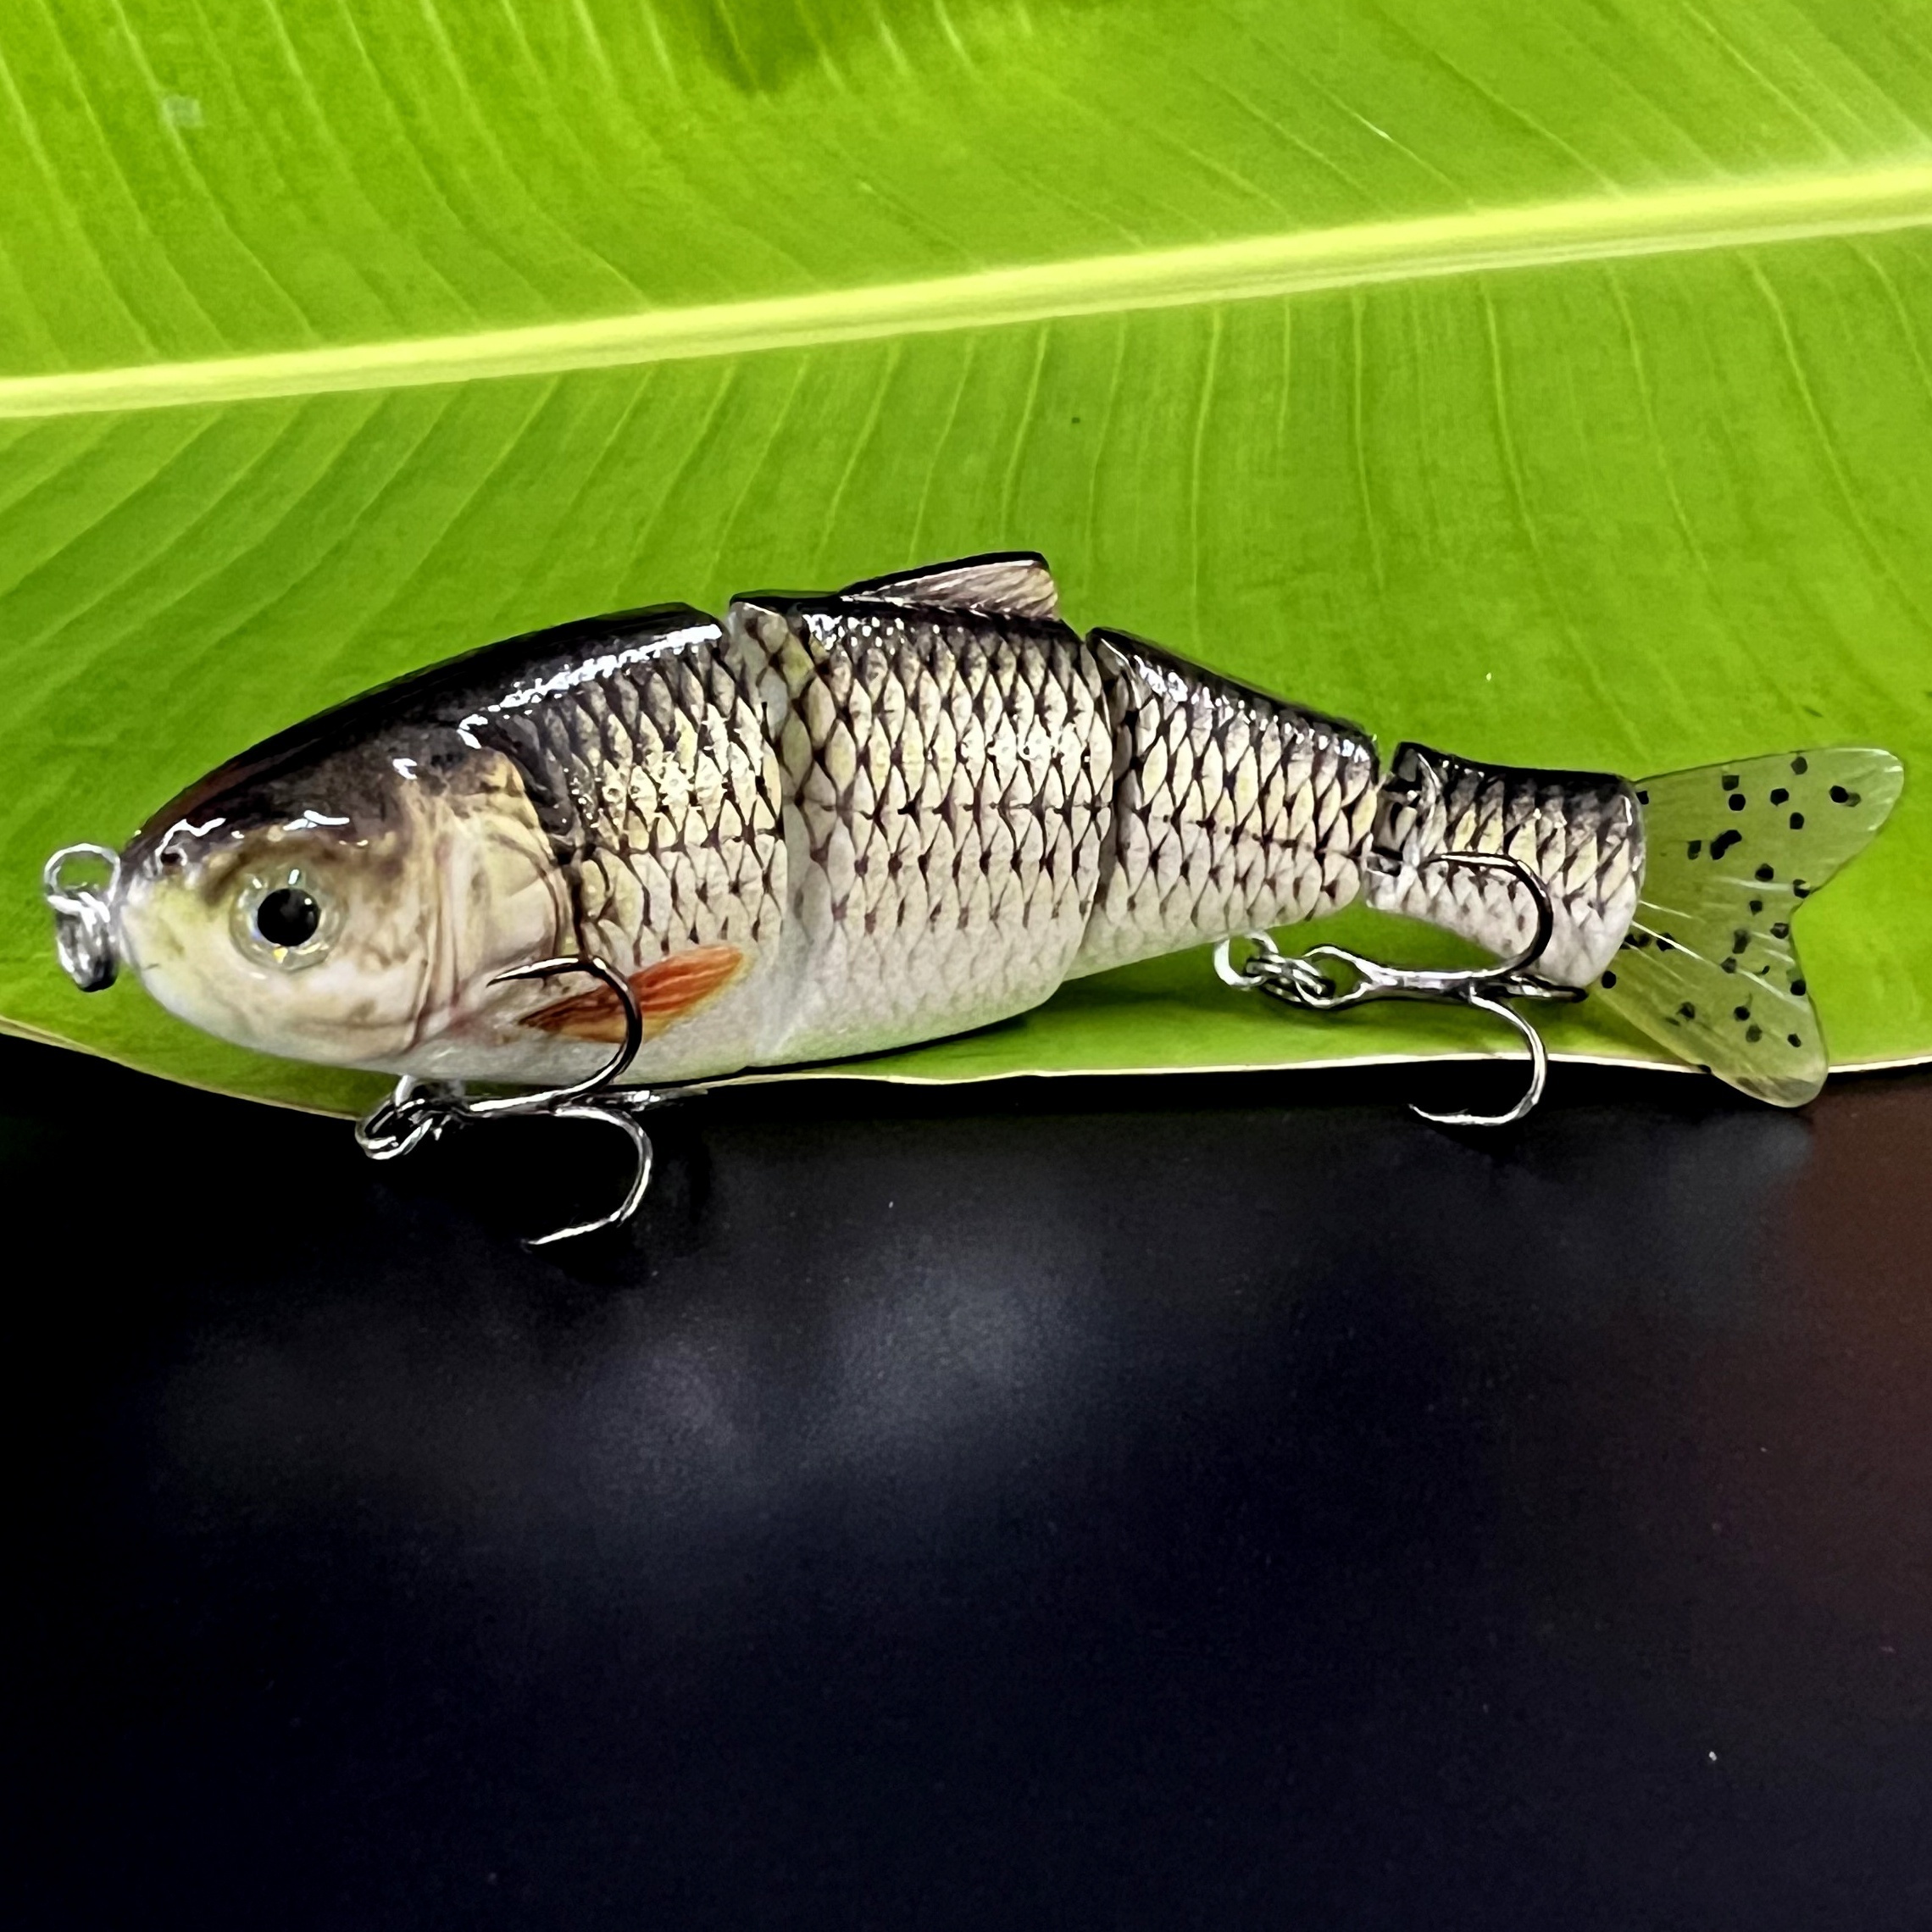 Bionic Perch Fishing Lure - Multi-Jointed, Multi-Section Freshwater and  Saltwater Tackle with Realistic Movement